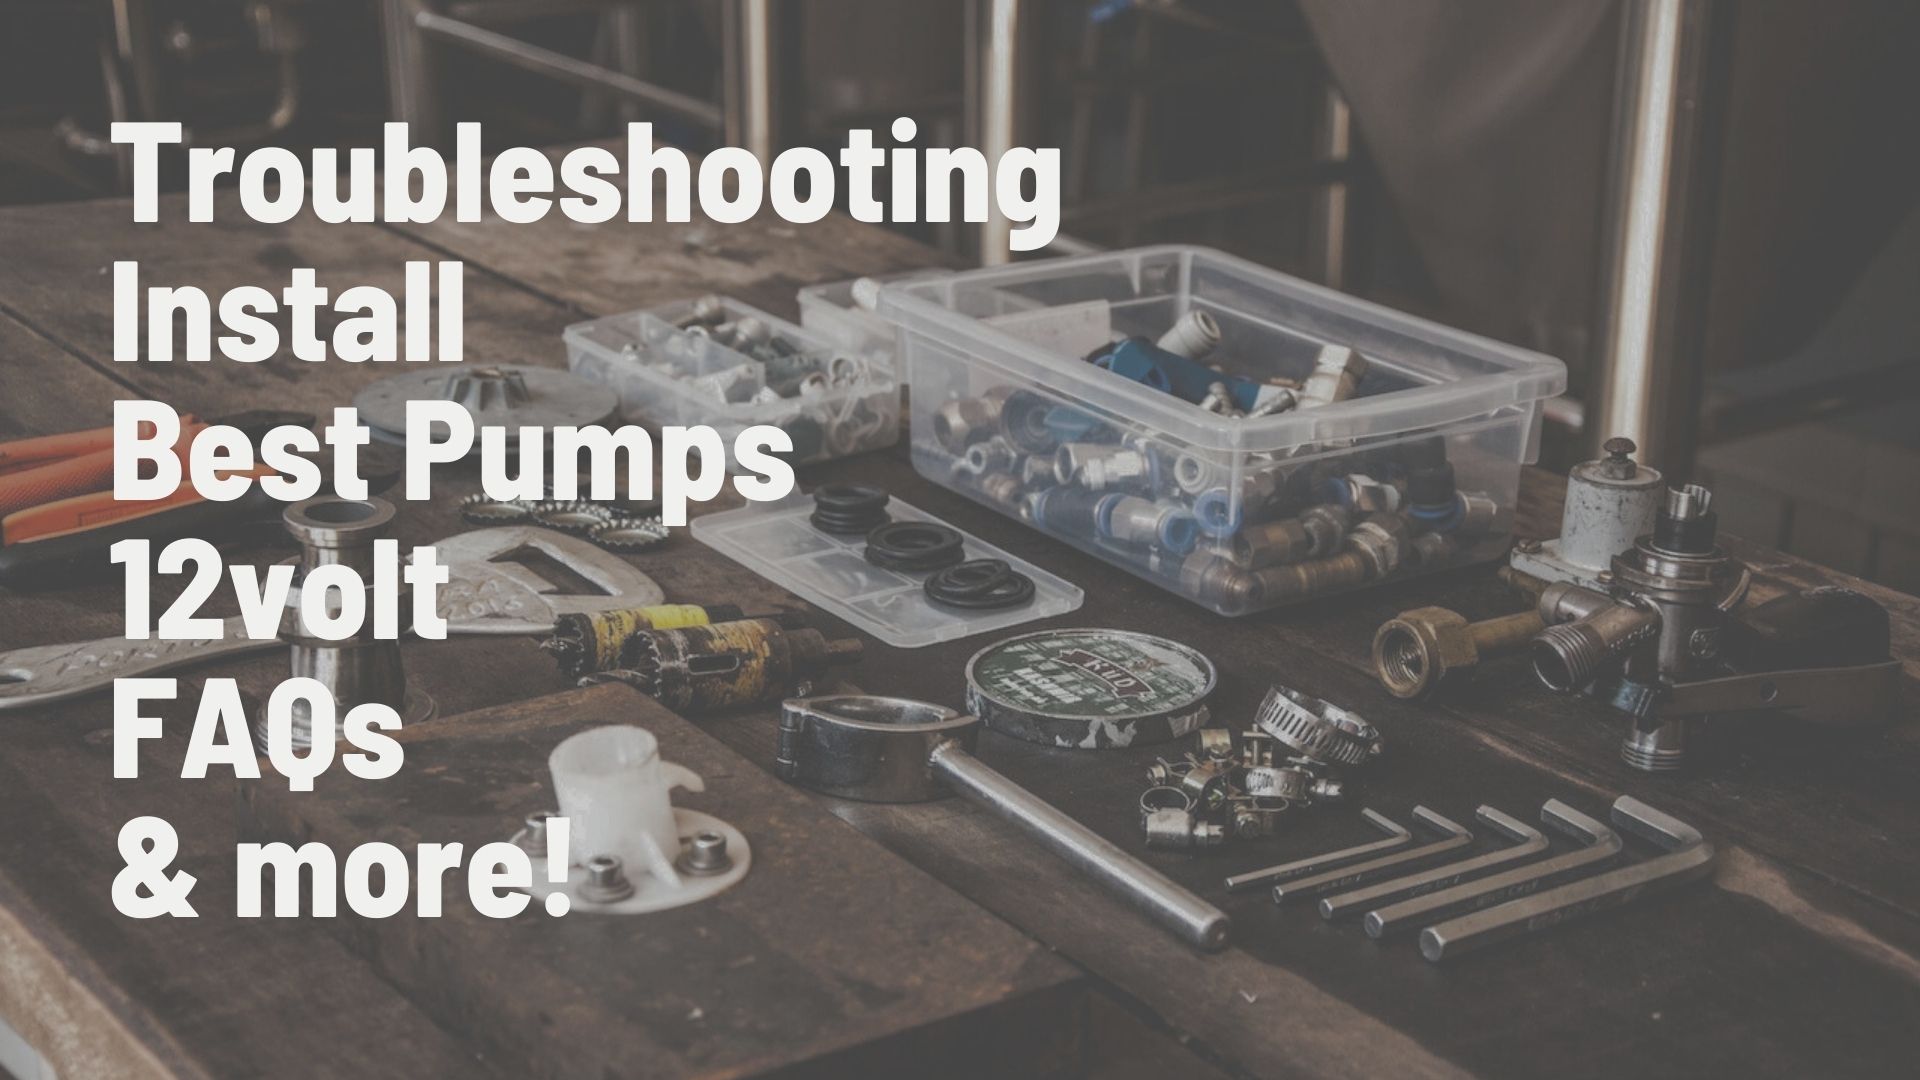 Did you know? - Pumps should not be run dry 